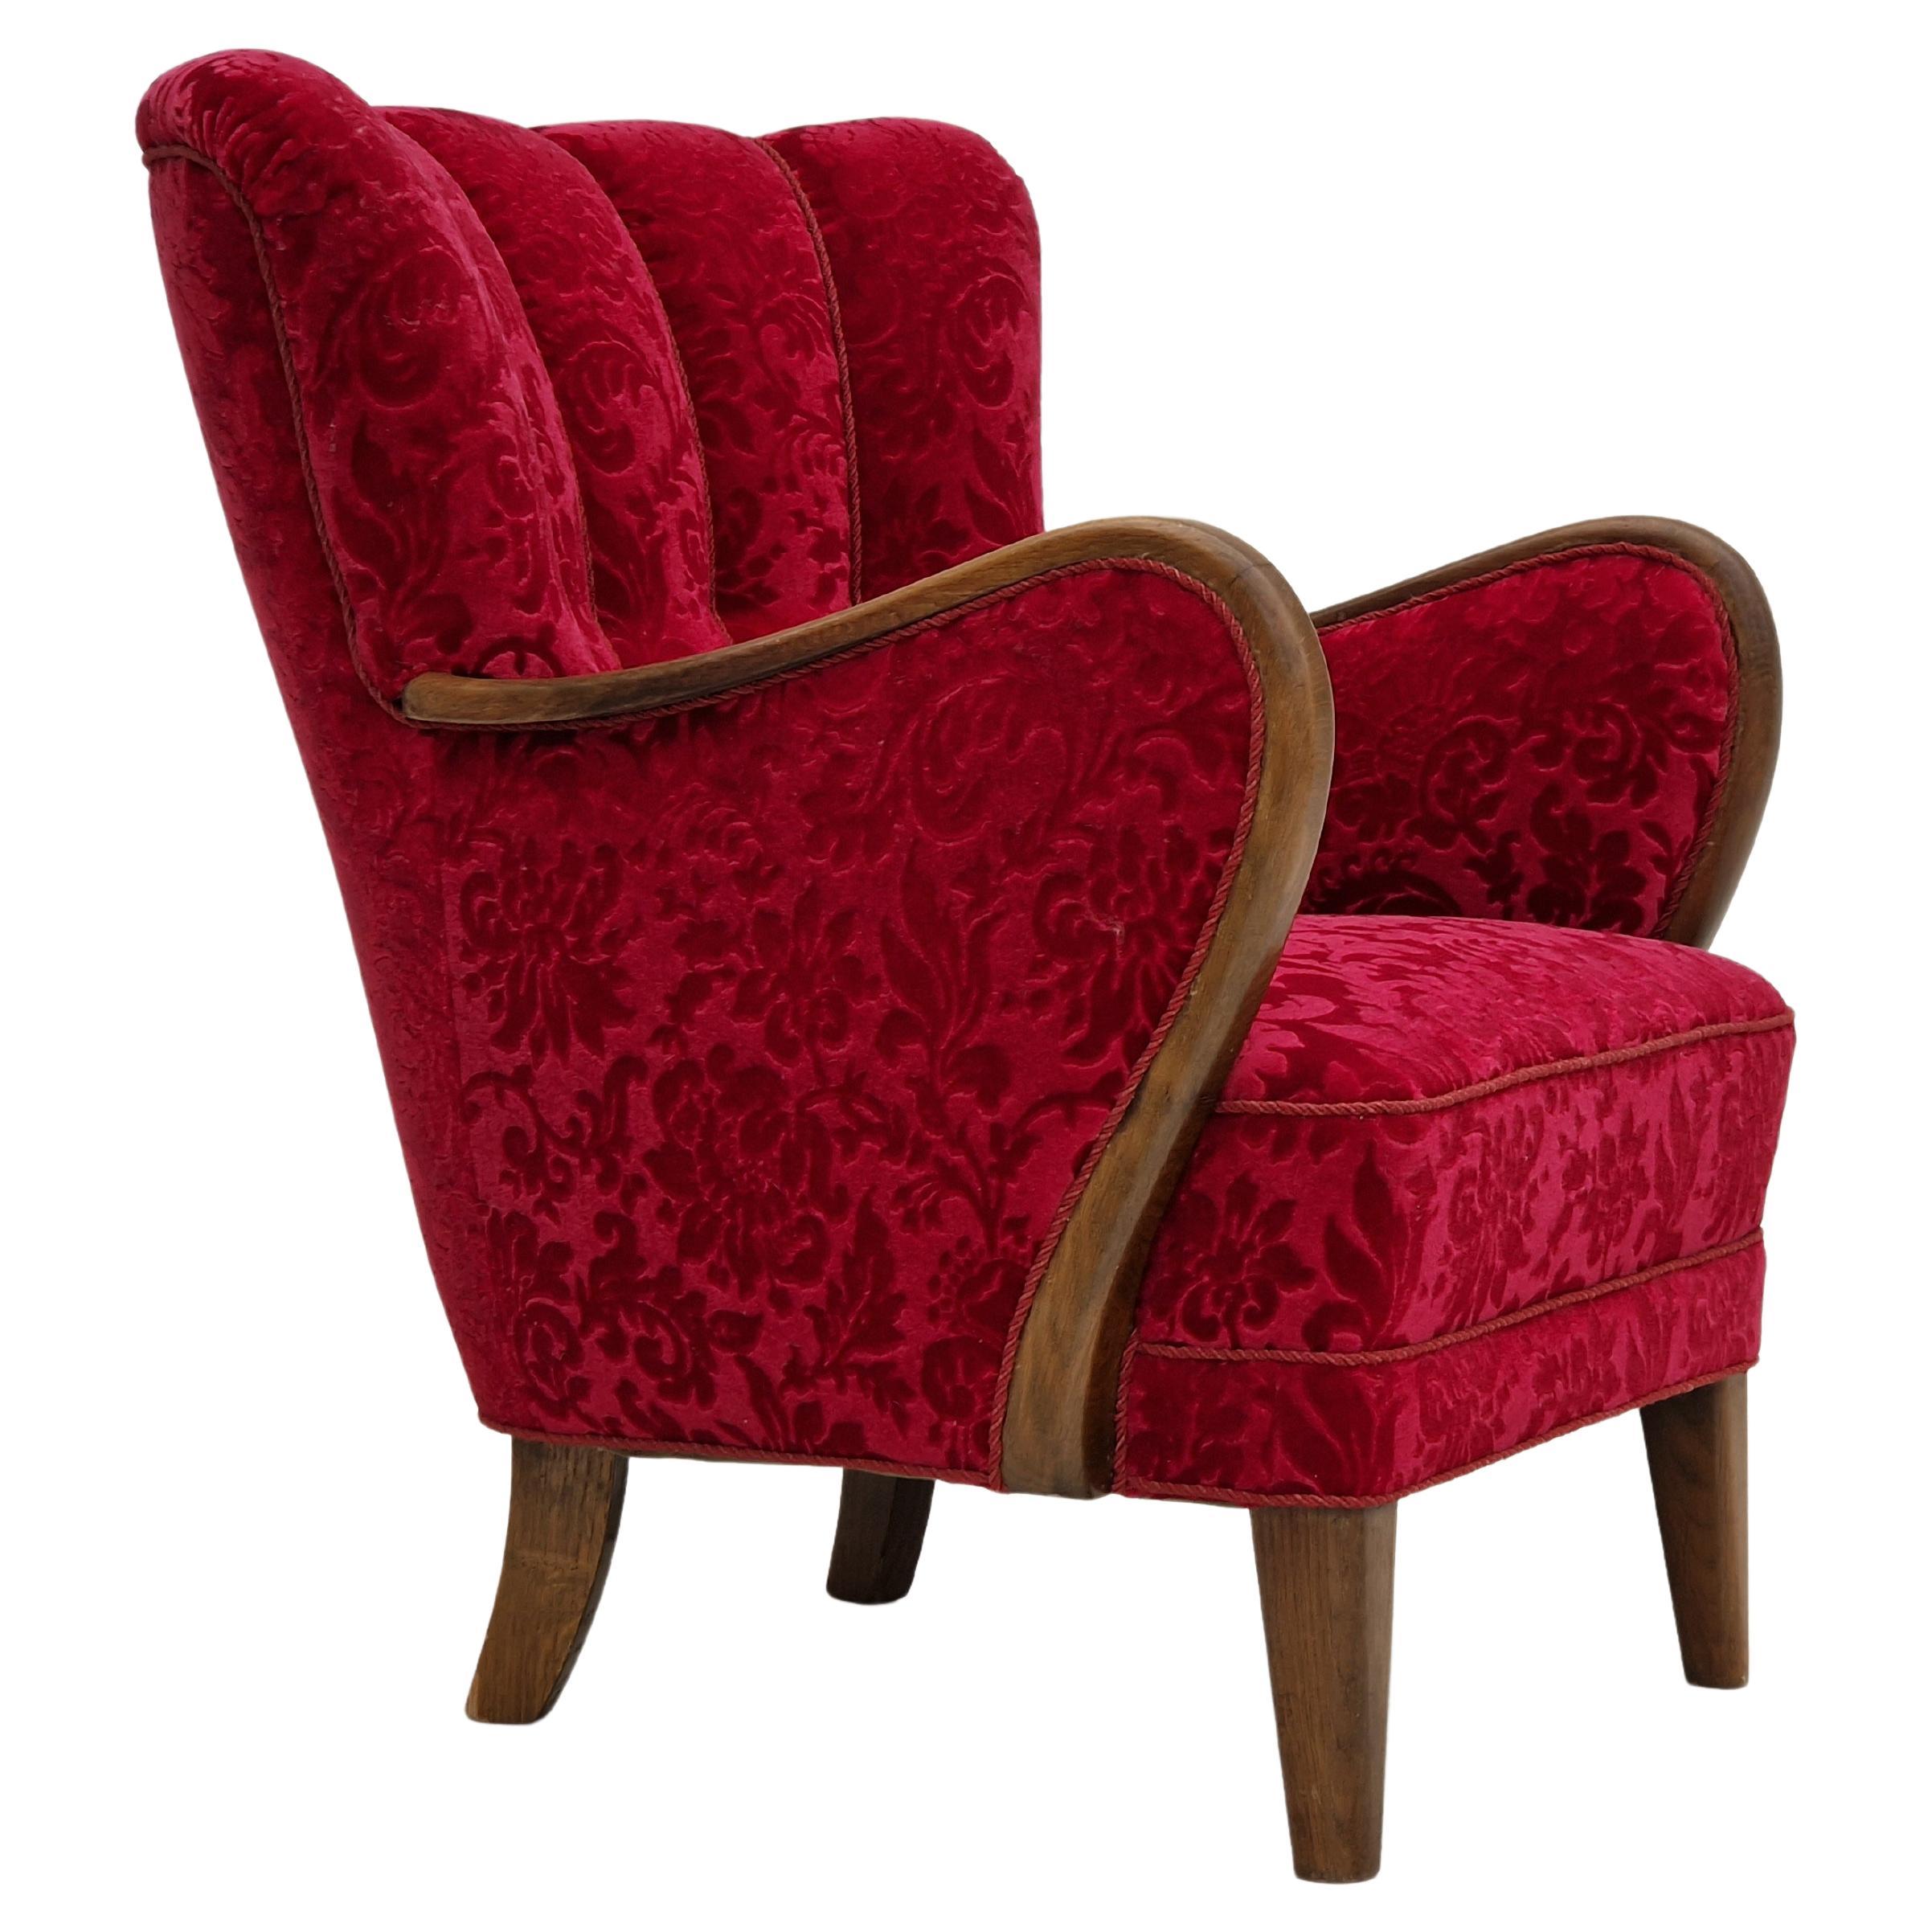 1960s, Danish design by Alfred Christensen, armchair in cherry red fabric. For Sale